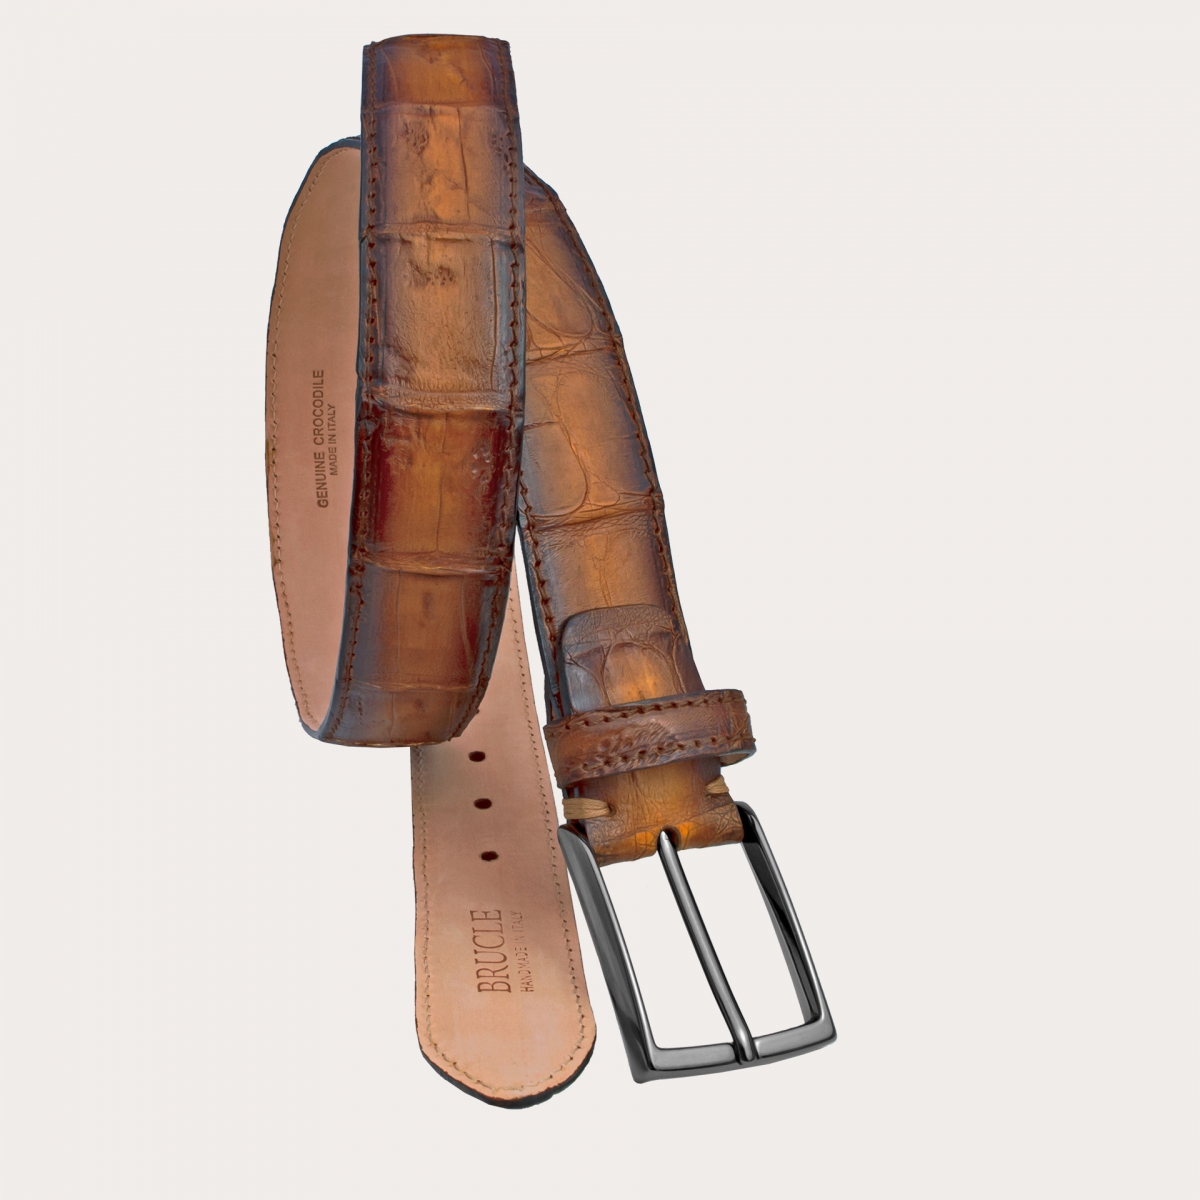 BRUCLE Refined patinated belt in crocodile tail, brown and gold